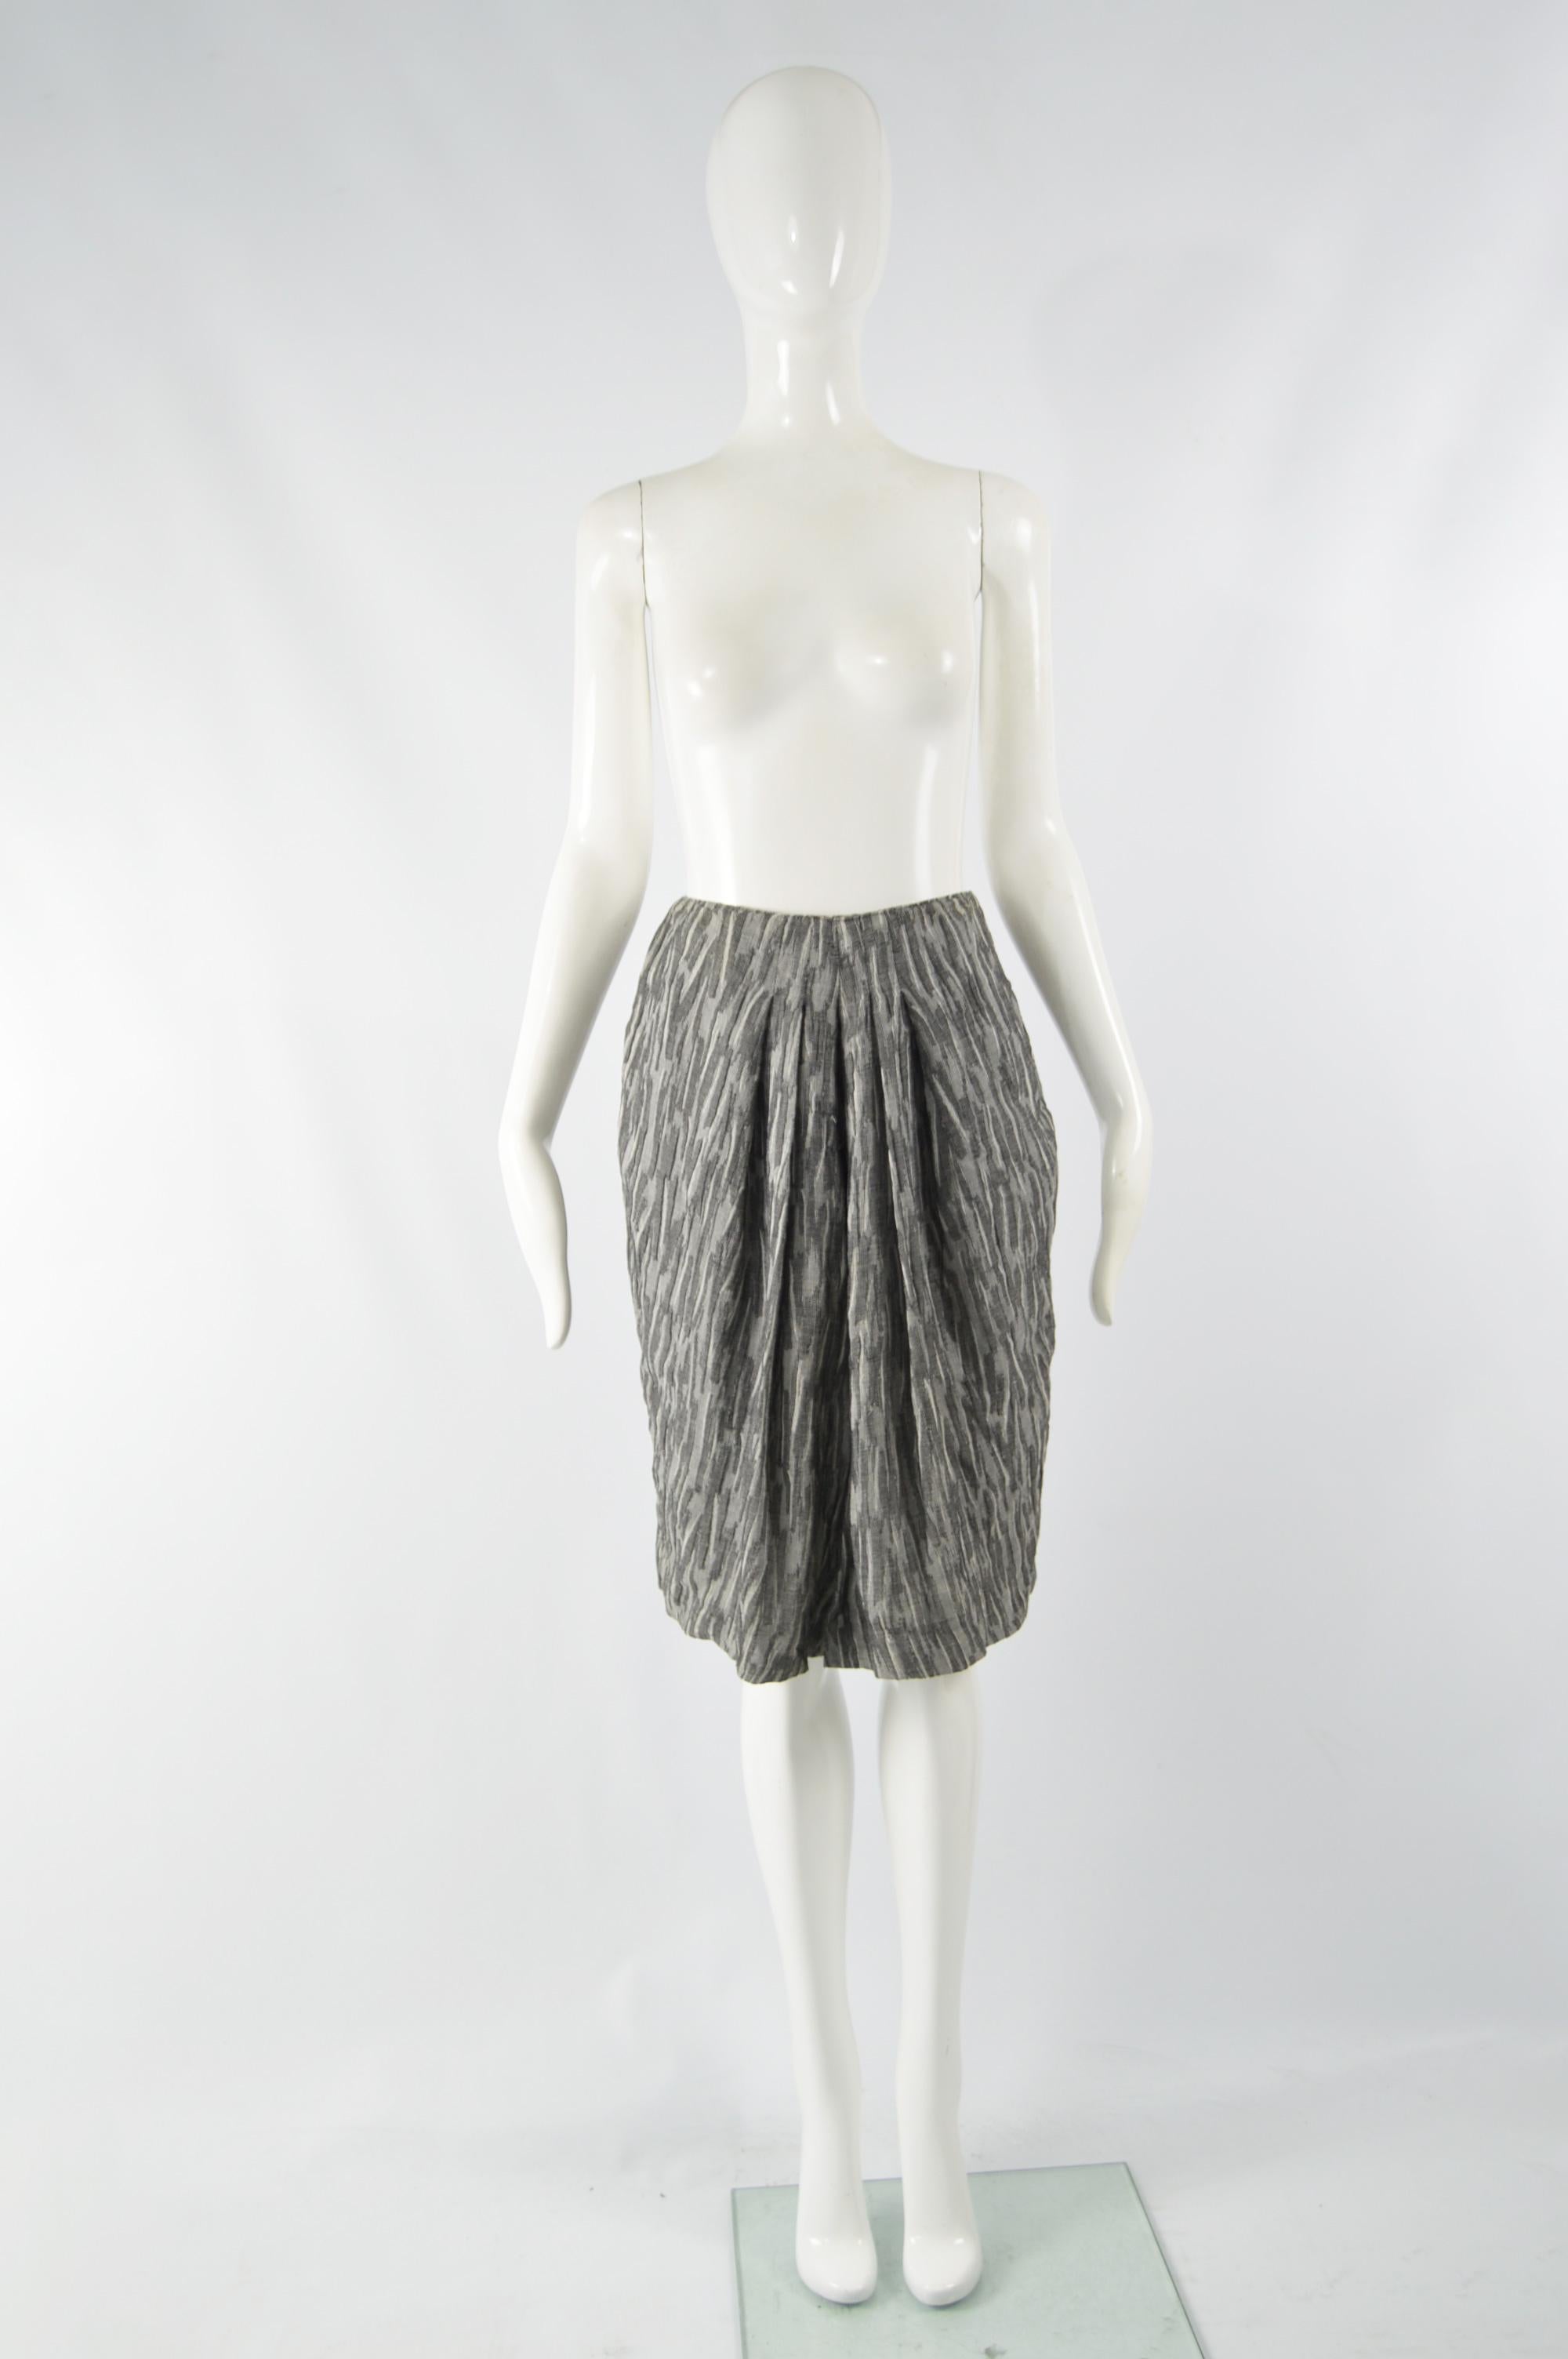 A chic vintage womens soft pleated skirt from the 90s by iconic fashion designer, Giorgio Armani for his mainline label. In a grey wool gauze fabric with a high split that creates draping / soft pleats at the front. 

Size: Marked vintage IT 42 but